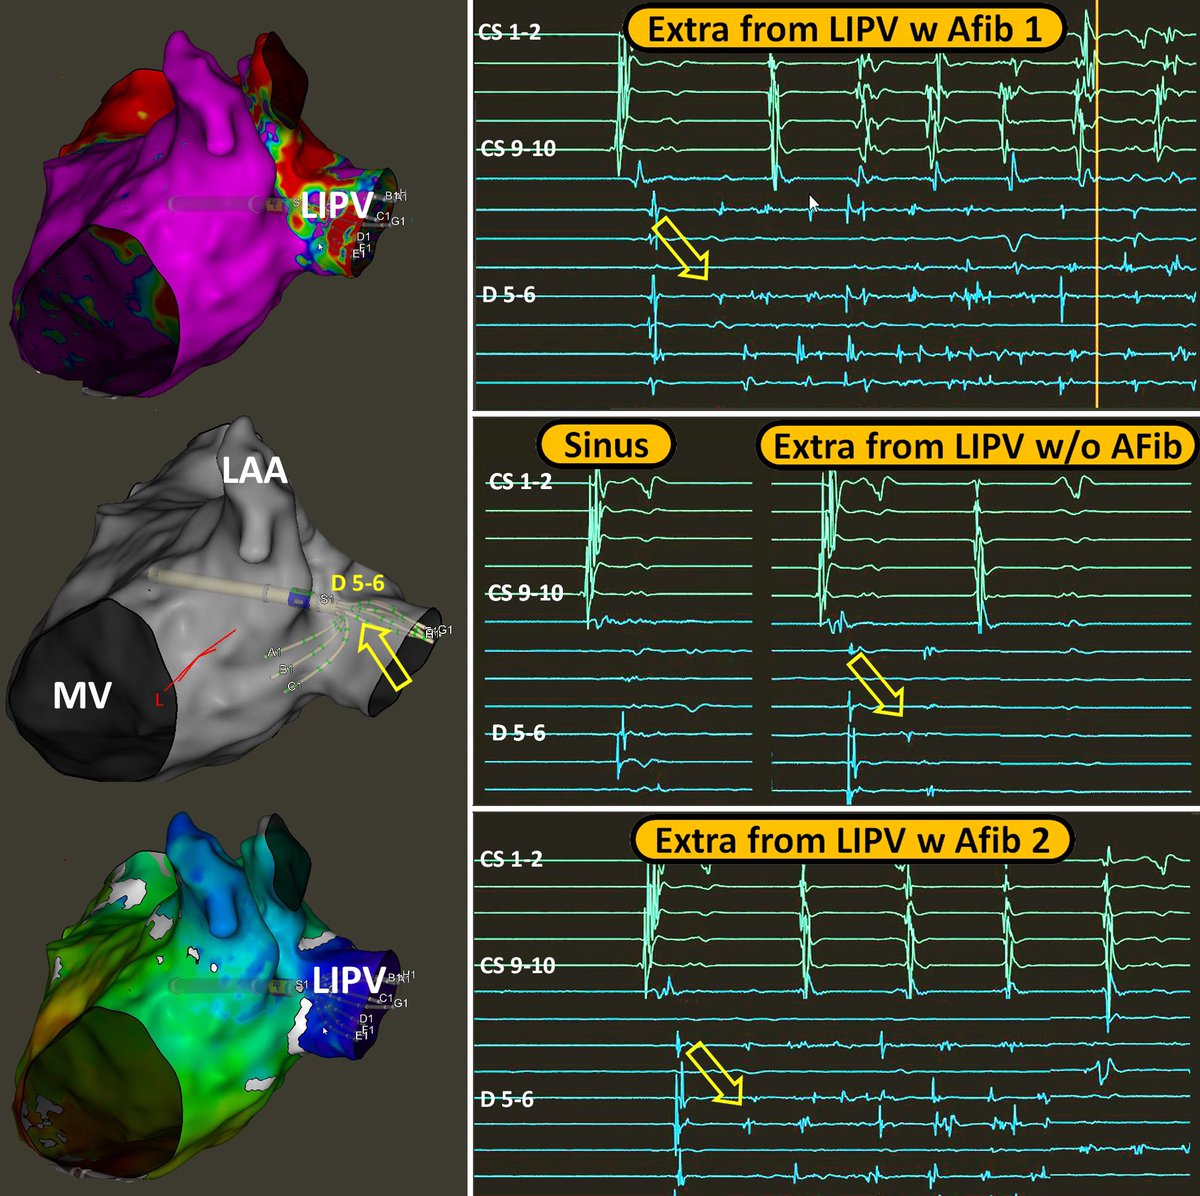 ✨ It’s always nice to witness some #PV #Firing 🔥inducing brief runs of Paroxysmal #AFib ✨ Reconnected #LIPV causing atrial #extras and #AFib with @GiulioConte9